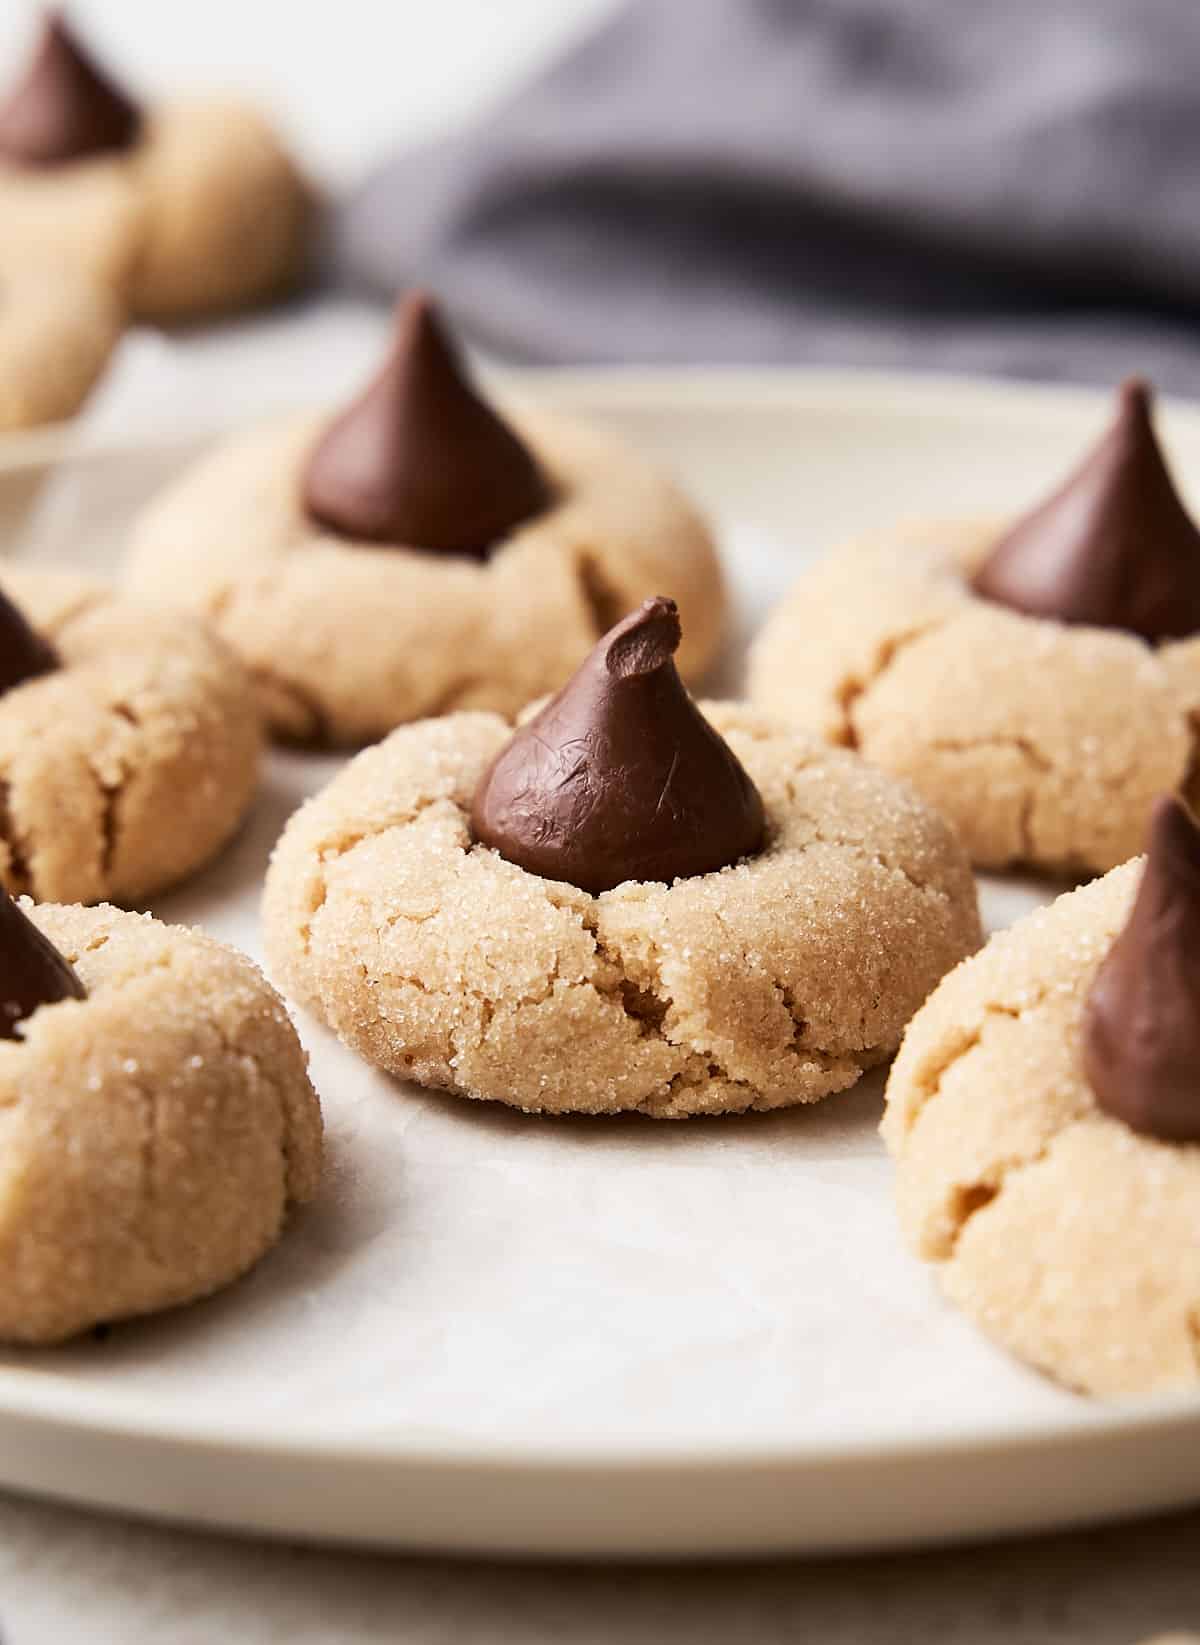 Cream colored plate with several peanut butter cookies with chocolate kisses. Grey cloth in the backbground.